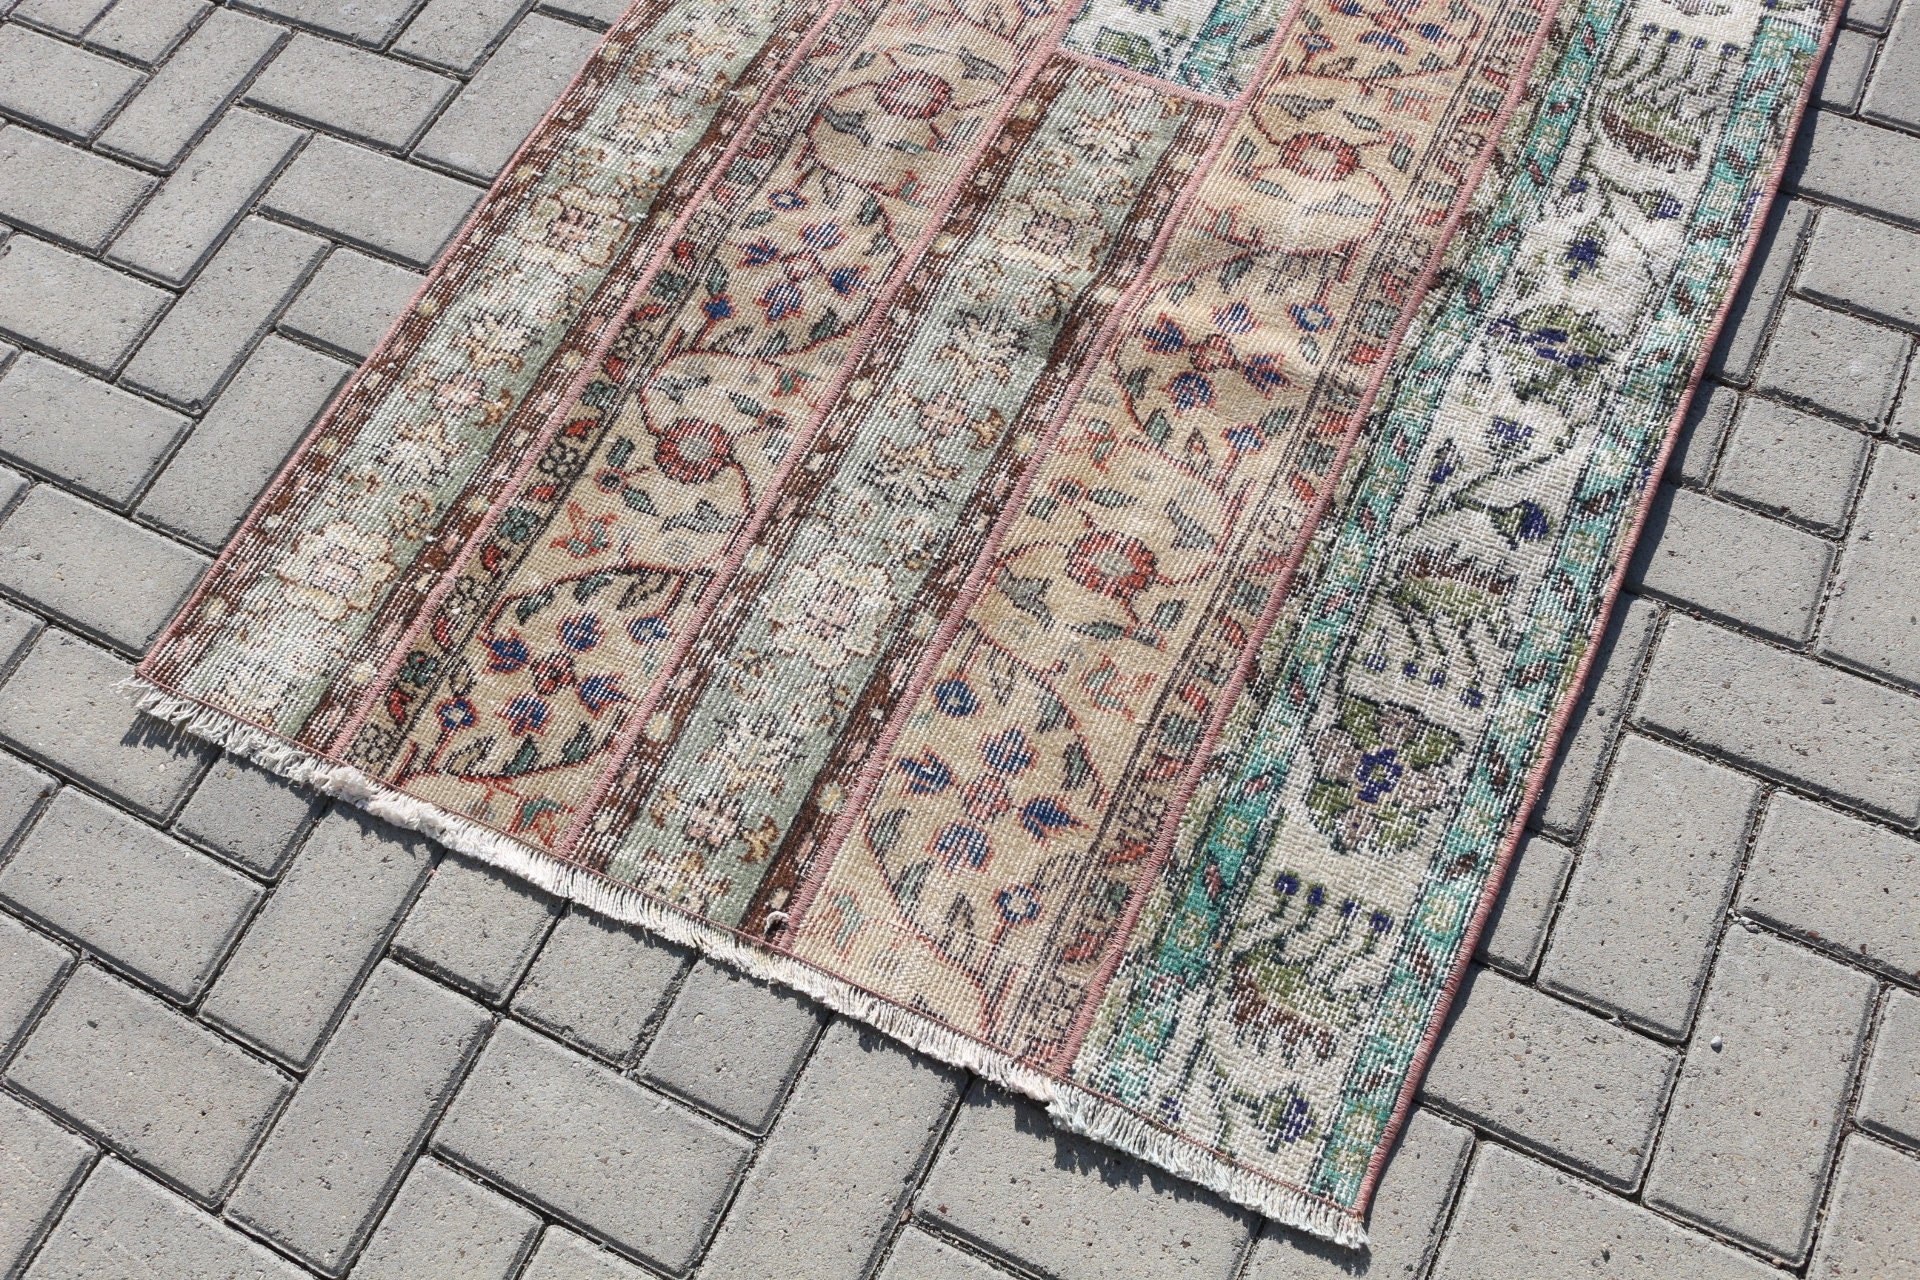 Turkish Rug, Anatolian Rug, Brown Oushak Rugs, Bright Rug, Vintage Rug, Bedroom Rugs, Kitchen Rugs, 3.2x4.1 ft Small Rugs